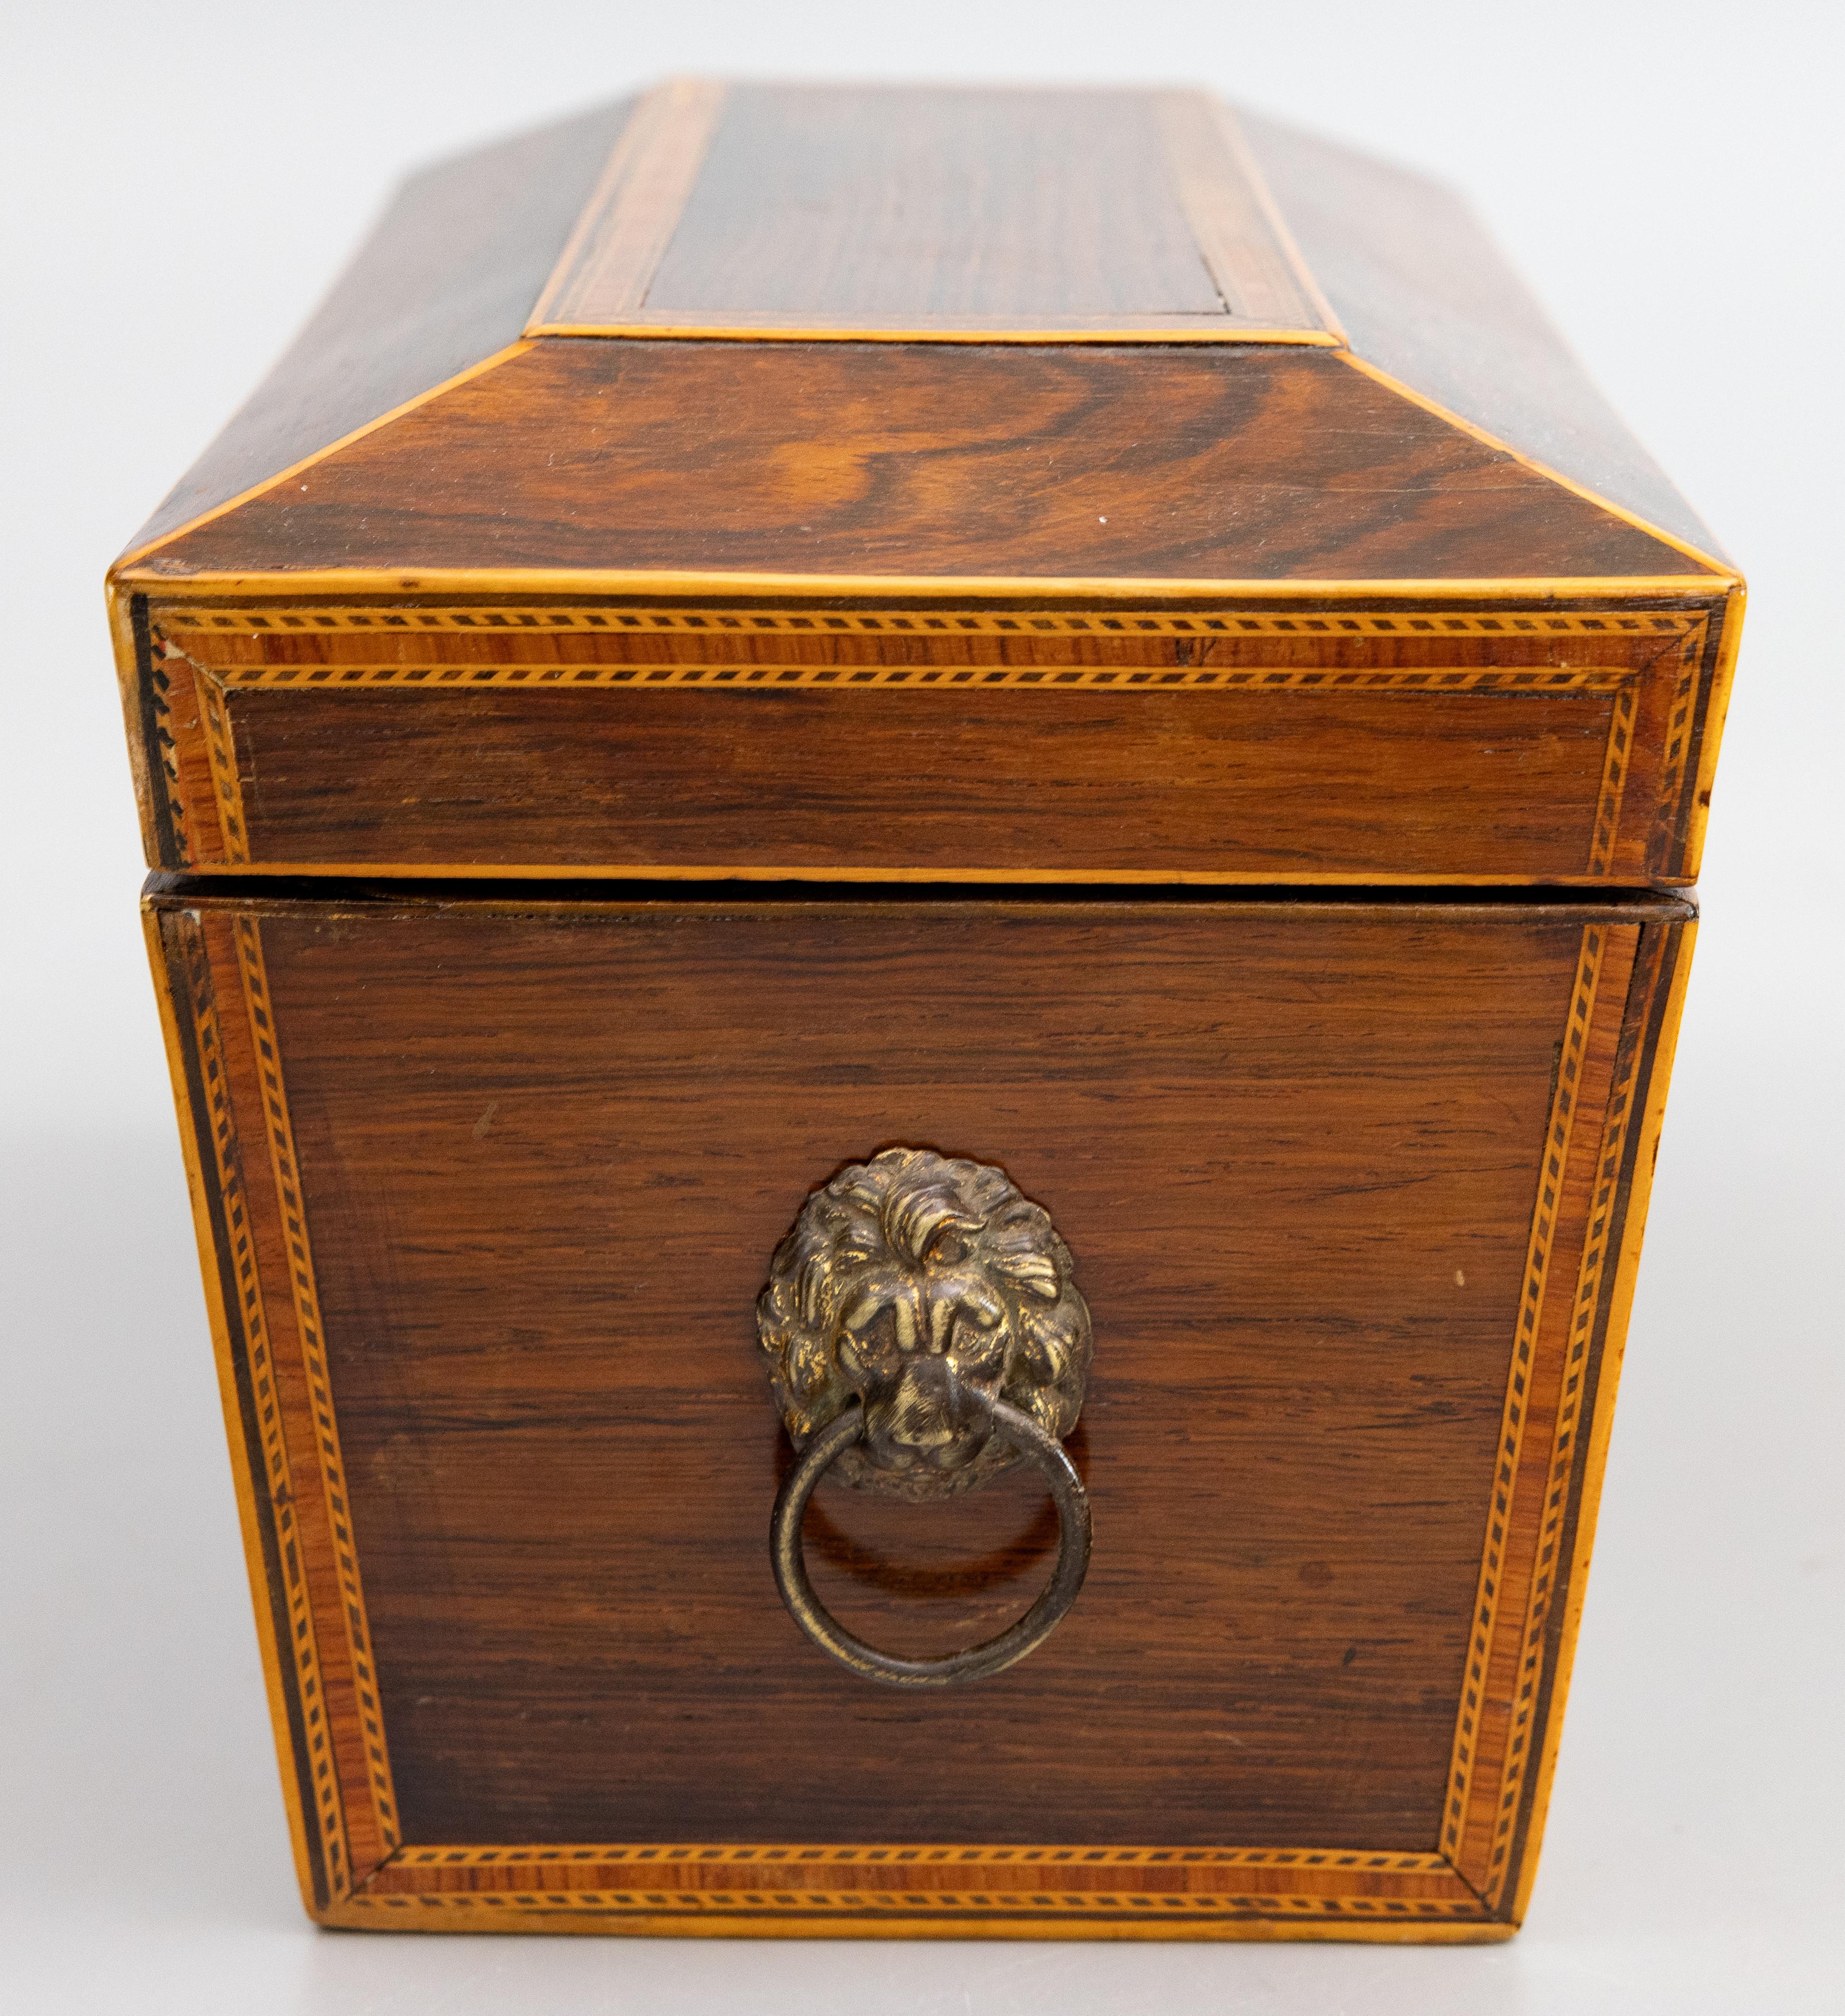 wood box with lock and key